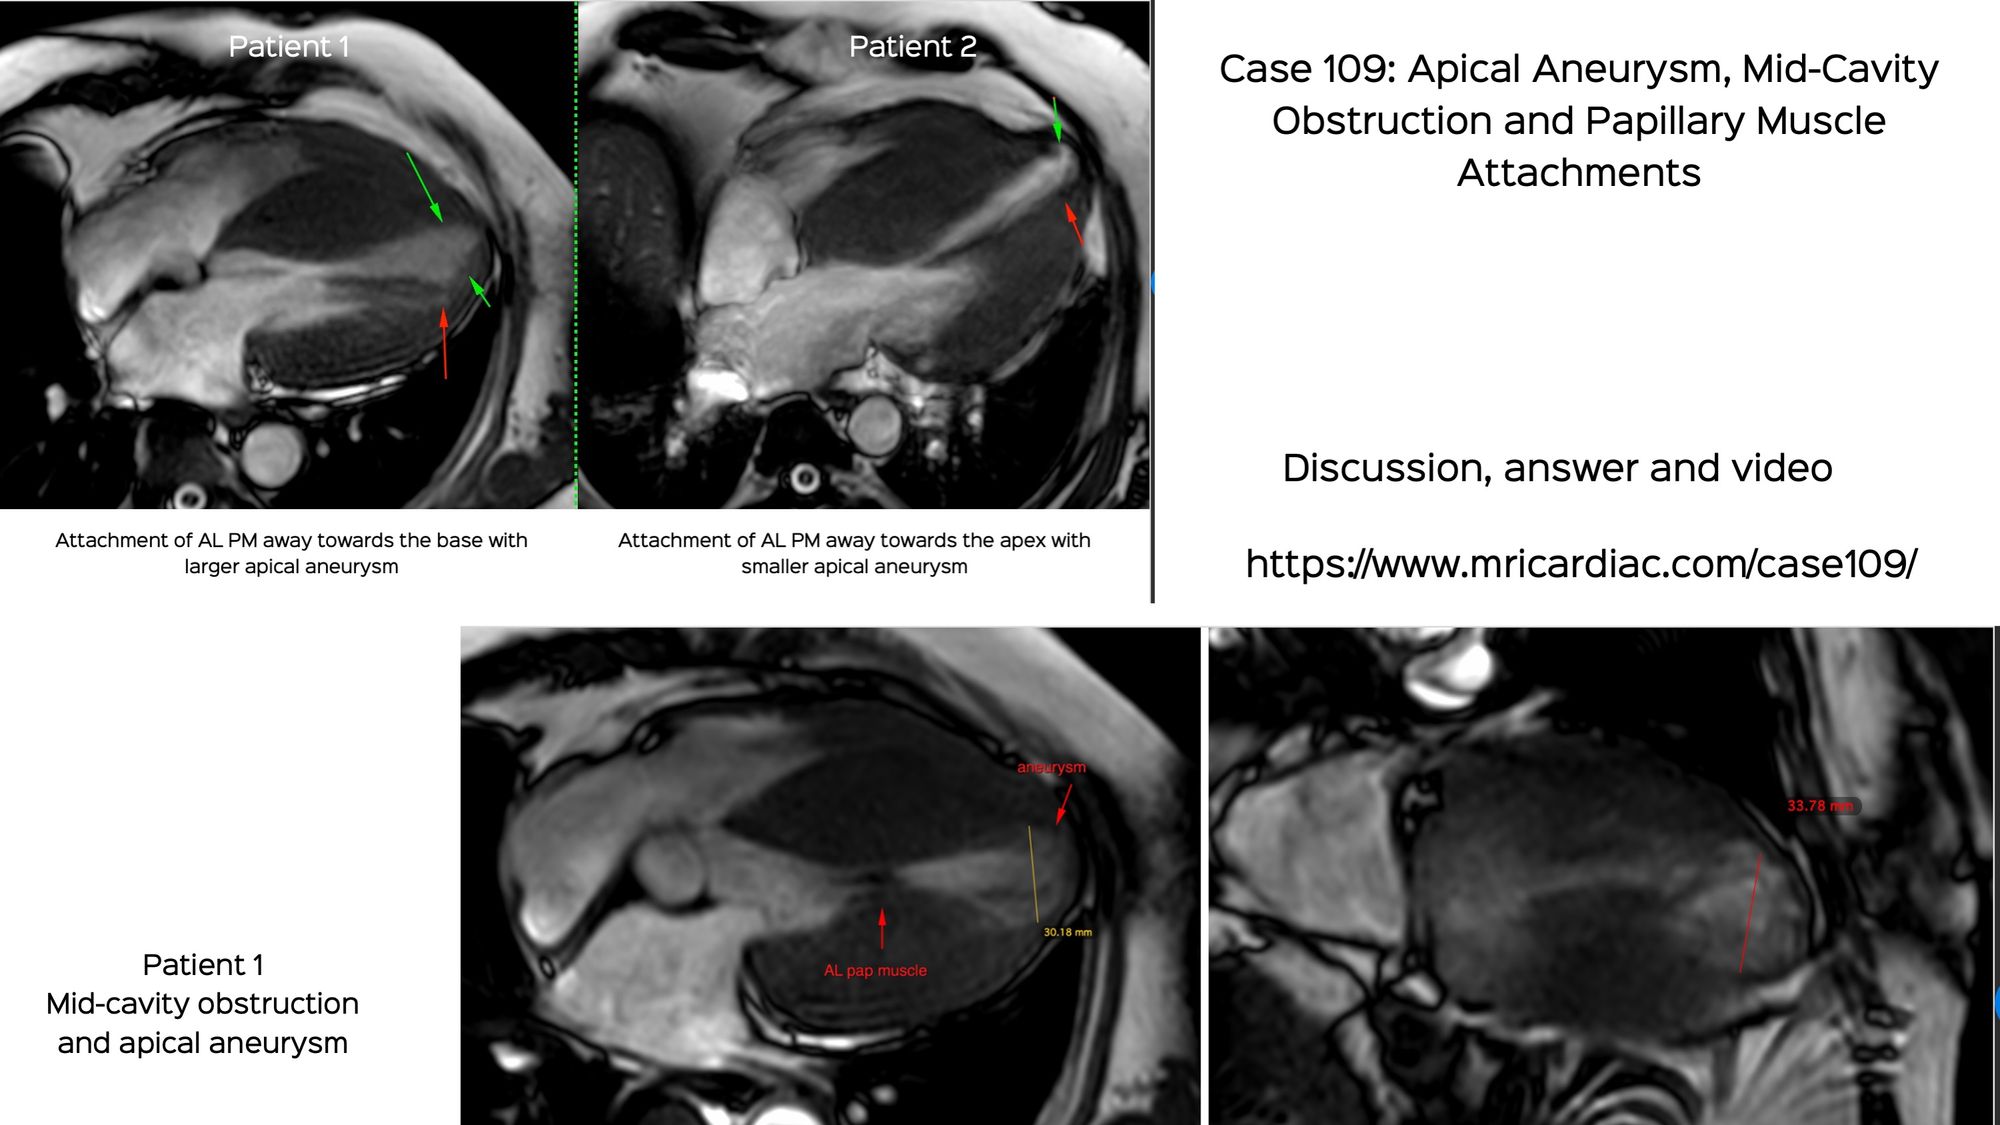 Case 109: Apical Aneurysm, Mid-Cavity Obstruction and Papillary Muscle Attachments